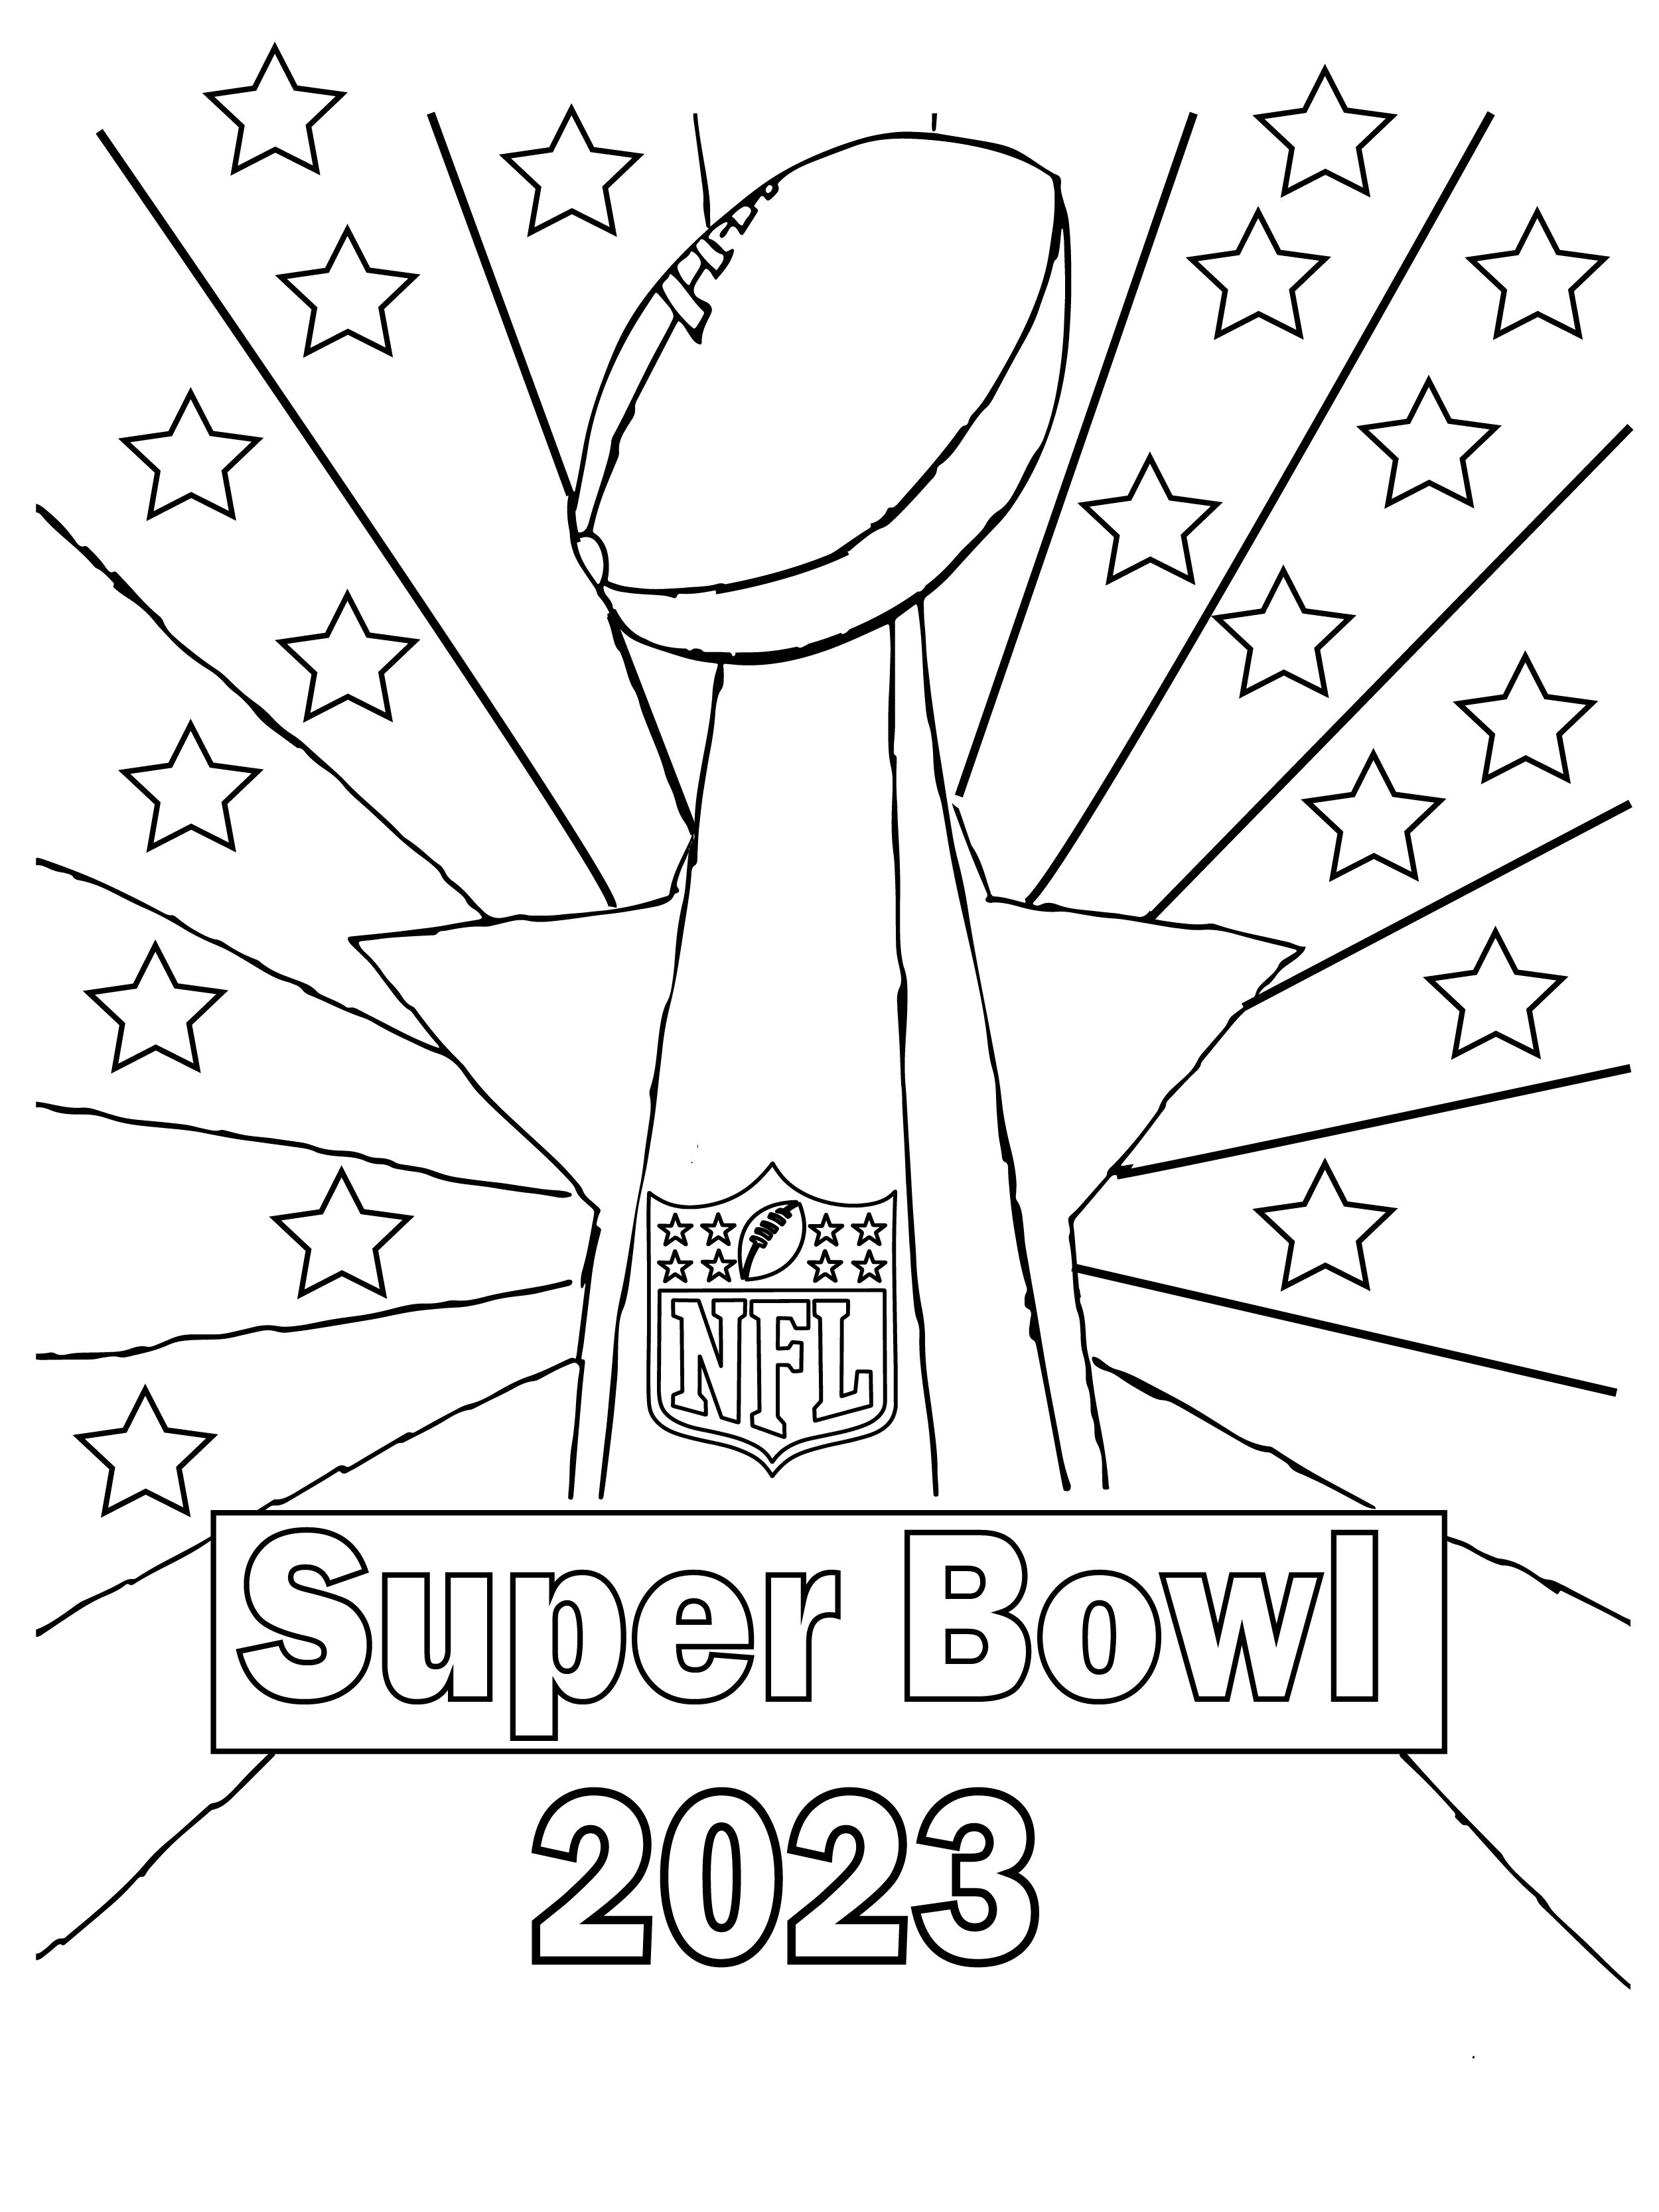 super-bowl-2023-coloring-page-free-printable-coloring-pages-for-kids